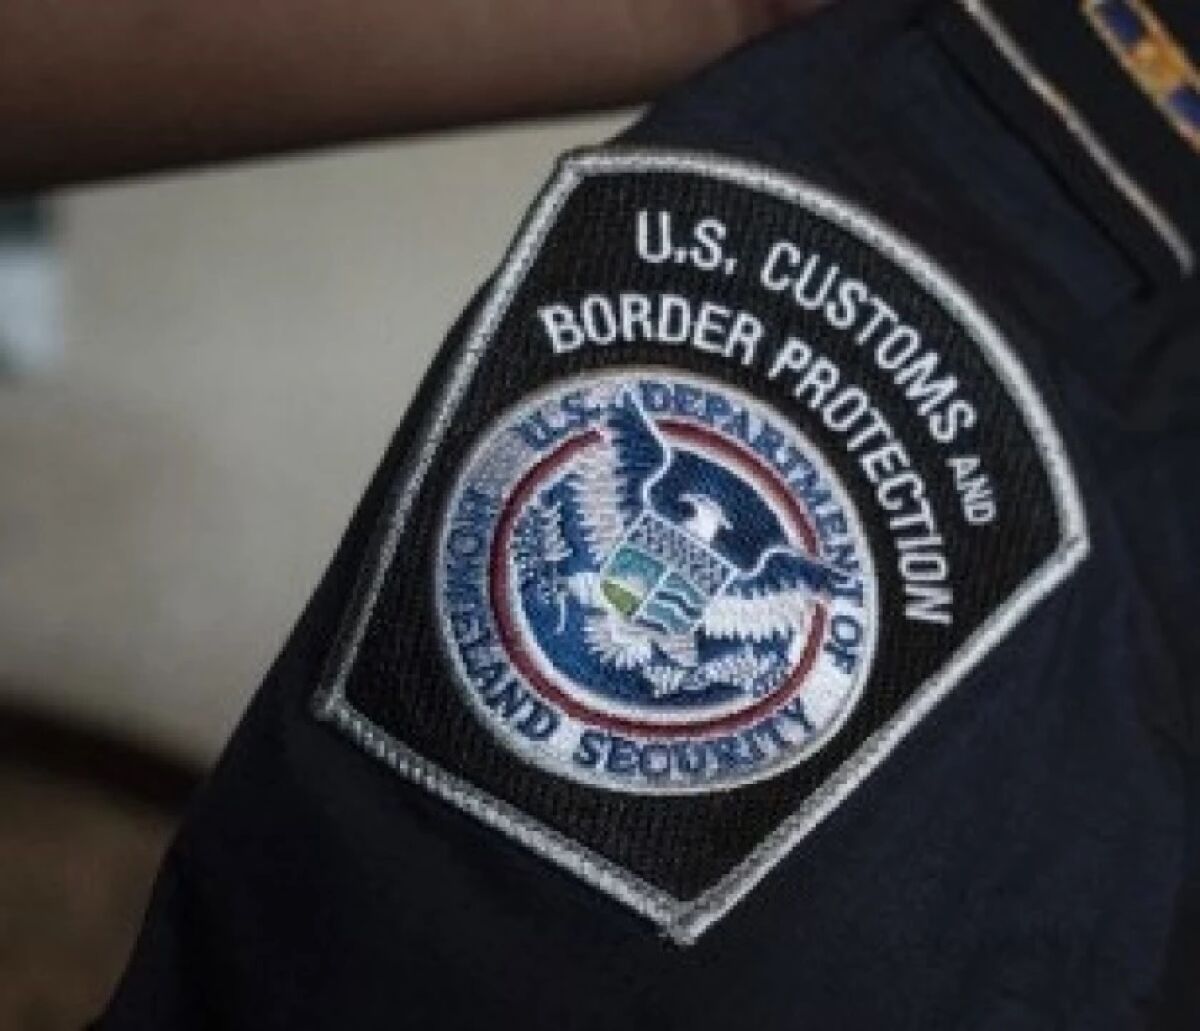 U.S. Customs and Border Protection patch on uniform